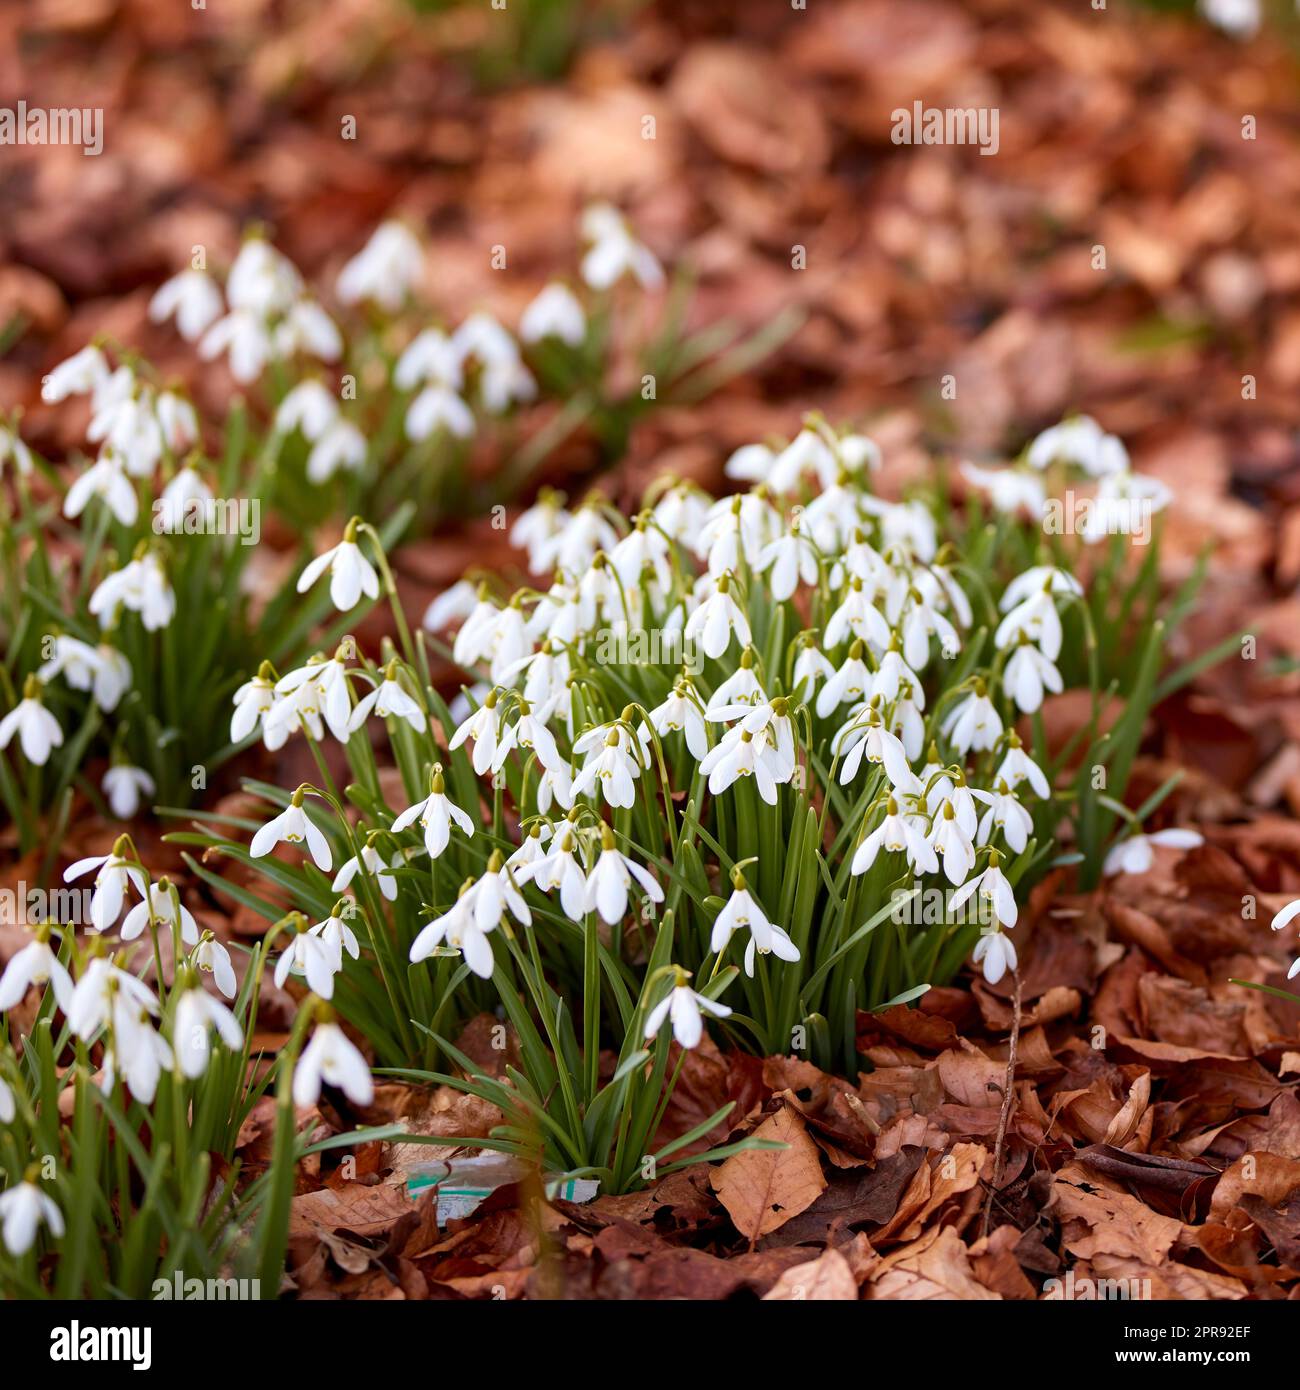 Beautiful white flowers, outdoors on a sunny Spring day. Isolate natural garden shows bright, blooming plants that create calm, serene and tranquil environment. Official name is Galanthus nivalis. Stock Photo